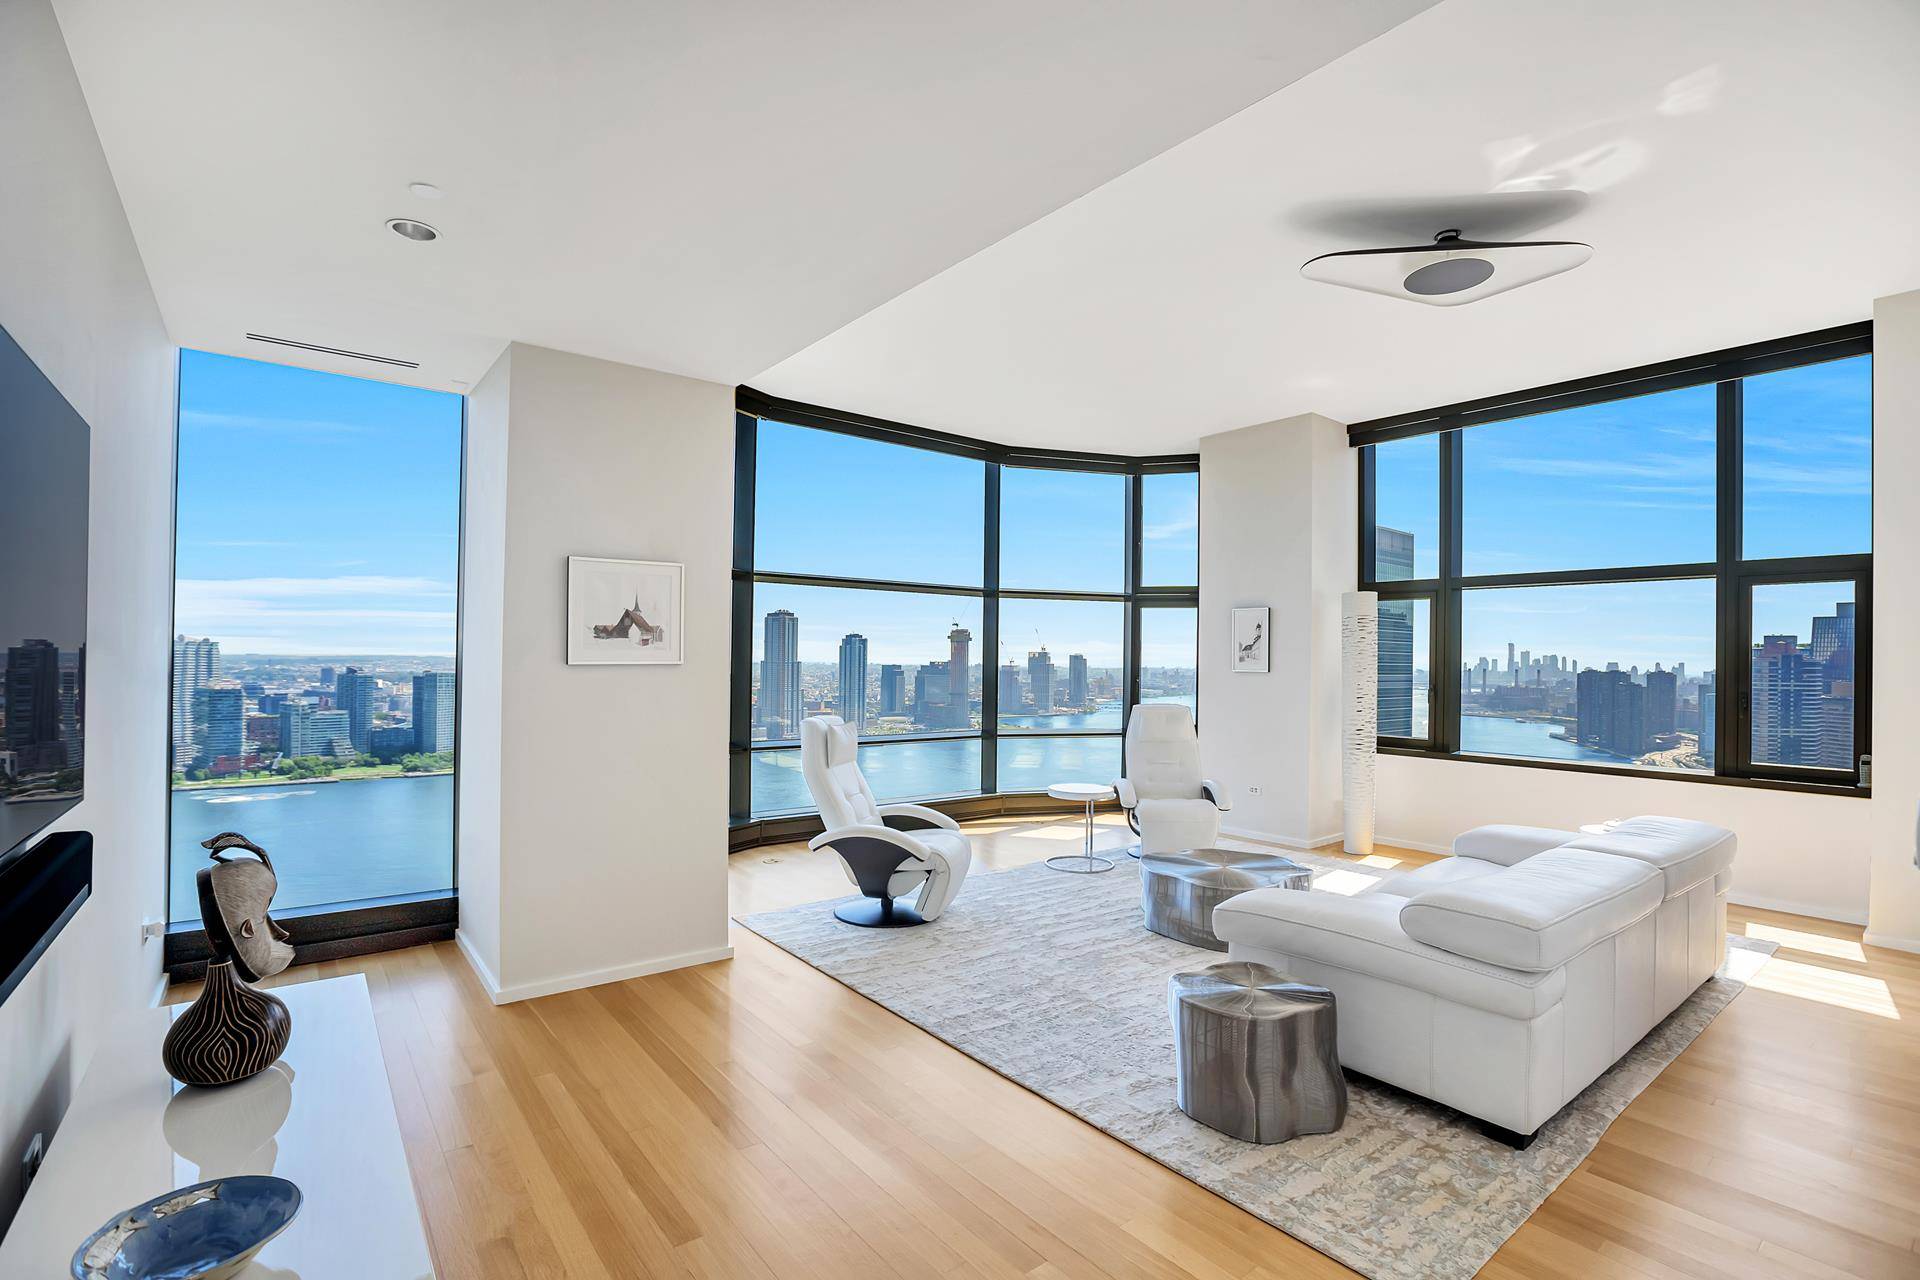 Sophisticated and sun drenched, this corner three bedroom, three bathroom luxury condominium residence designed by architect Sir Norman Foster, is the highest floor available in the line.